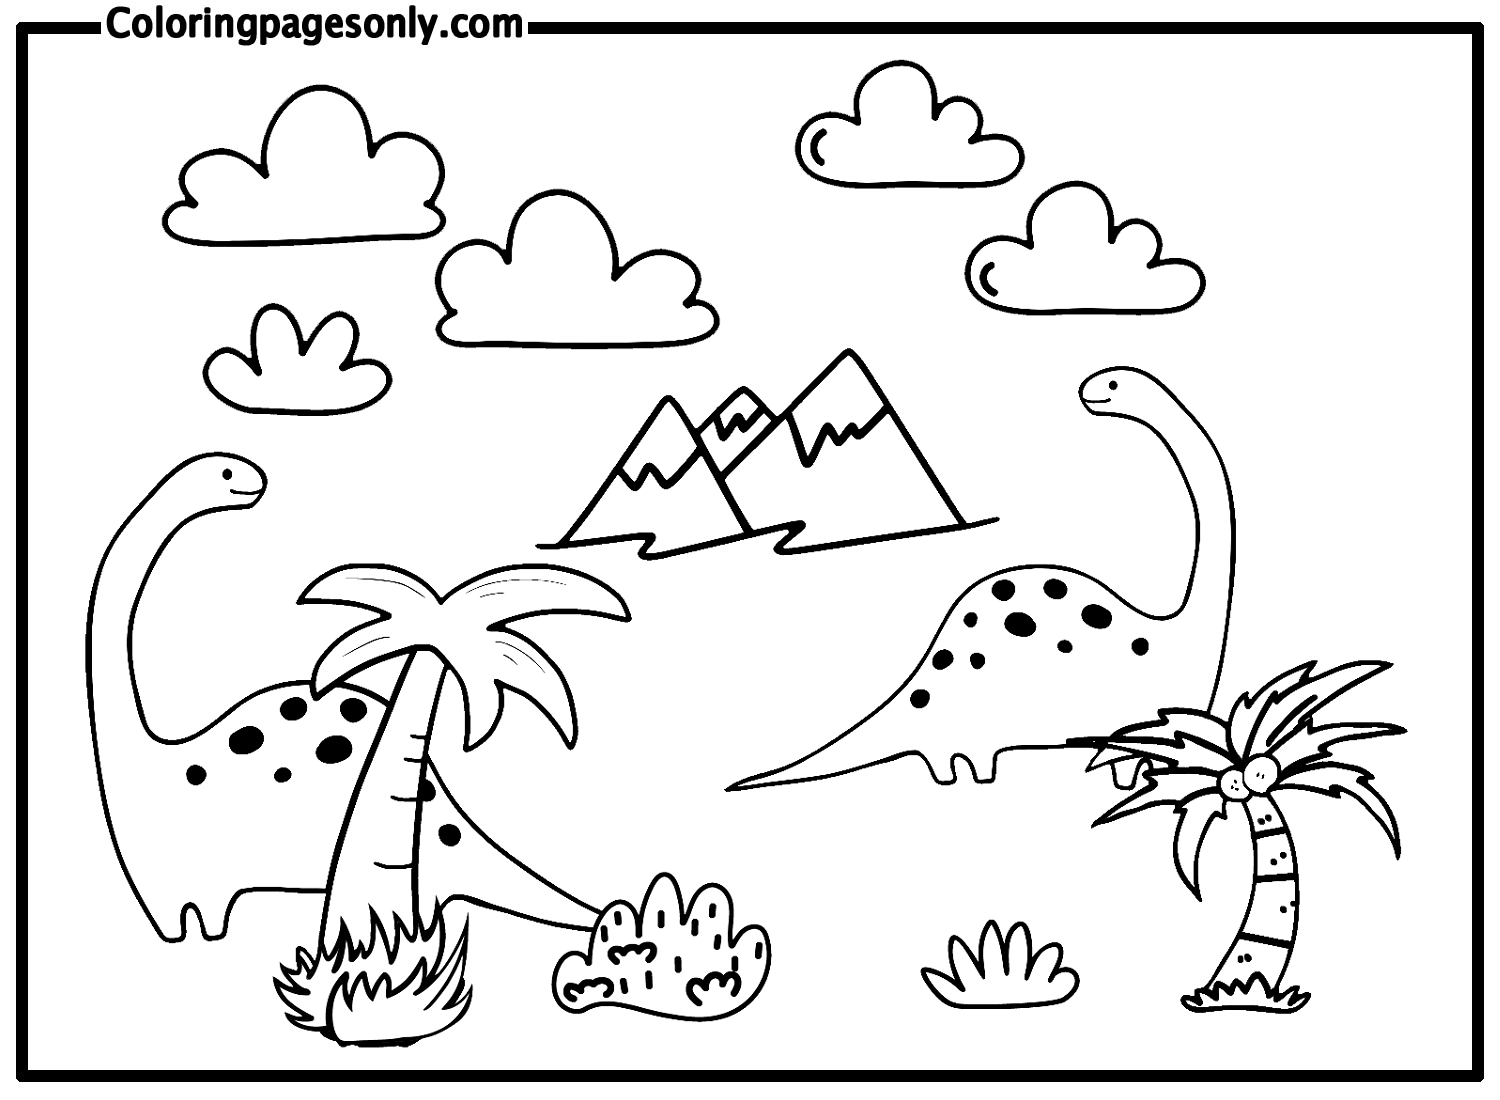 Dinosaurs in Forest Coloring Page